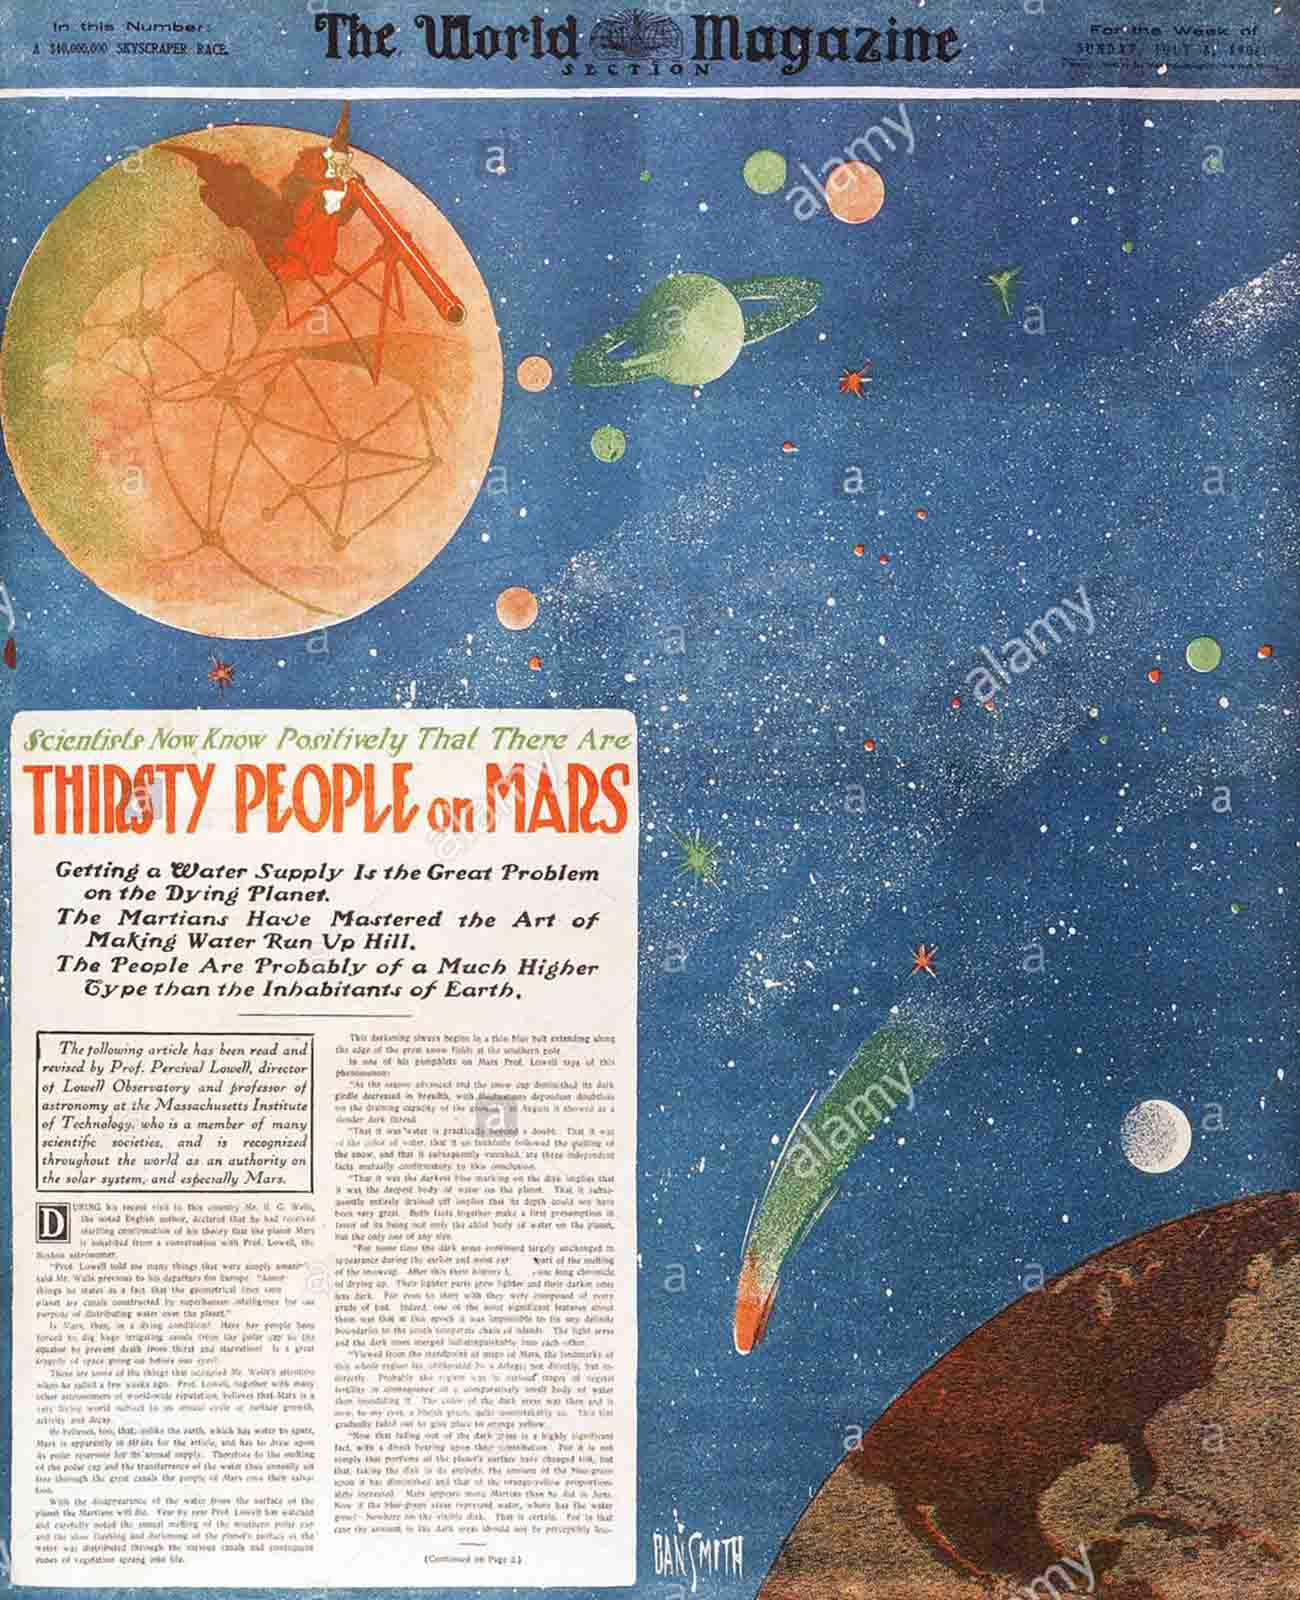 C3 Thirsty People on Mars, a feature in World Magazine, July 8, 1906